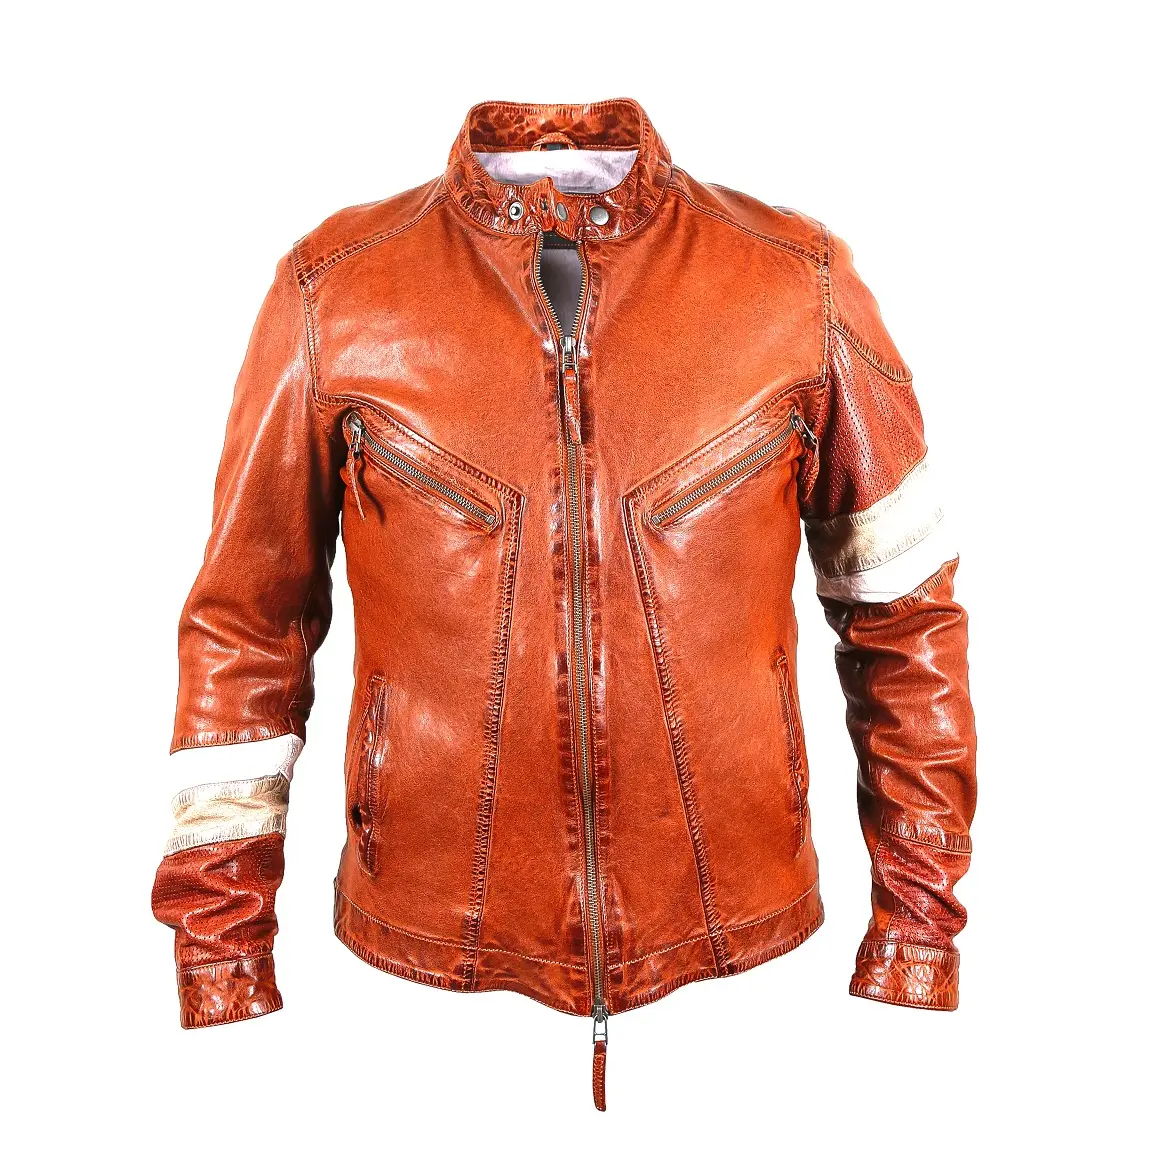 Wholesale Motorcycle Men Genuine Sheep Leather Jacket With Stripes Perforated Leather Parts100 % Genuine Slim Fit Jackets